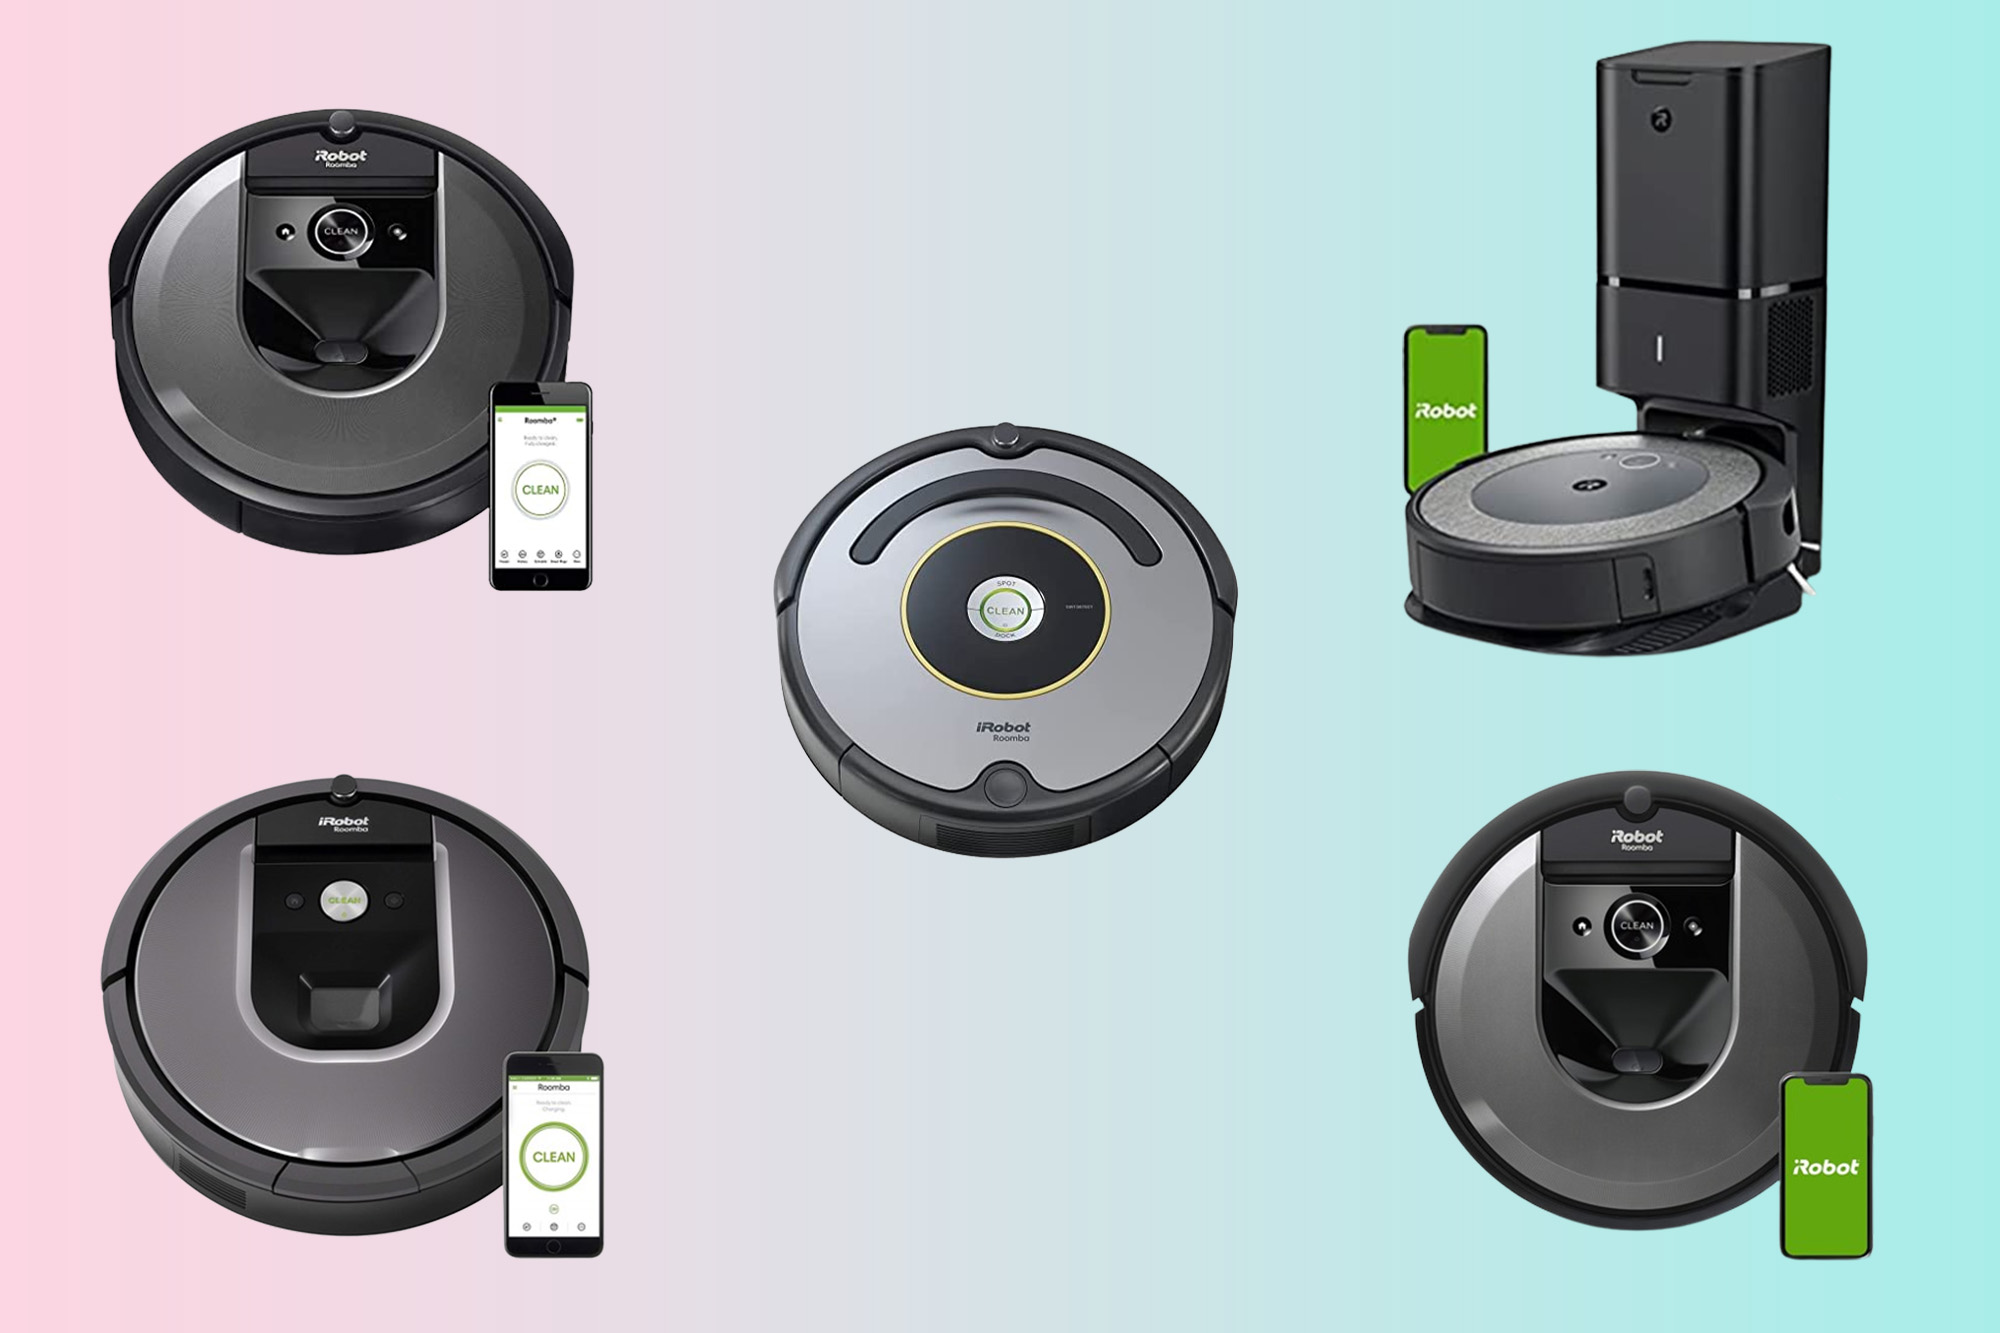 Zoom to Woot for more than $500 off refurbished Roomba robot vacuums